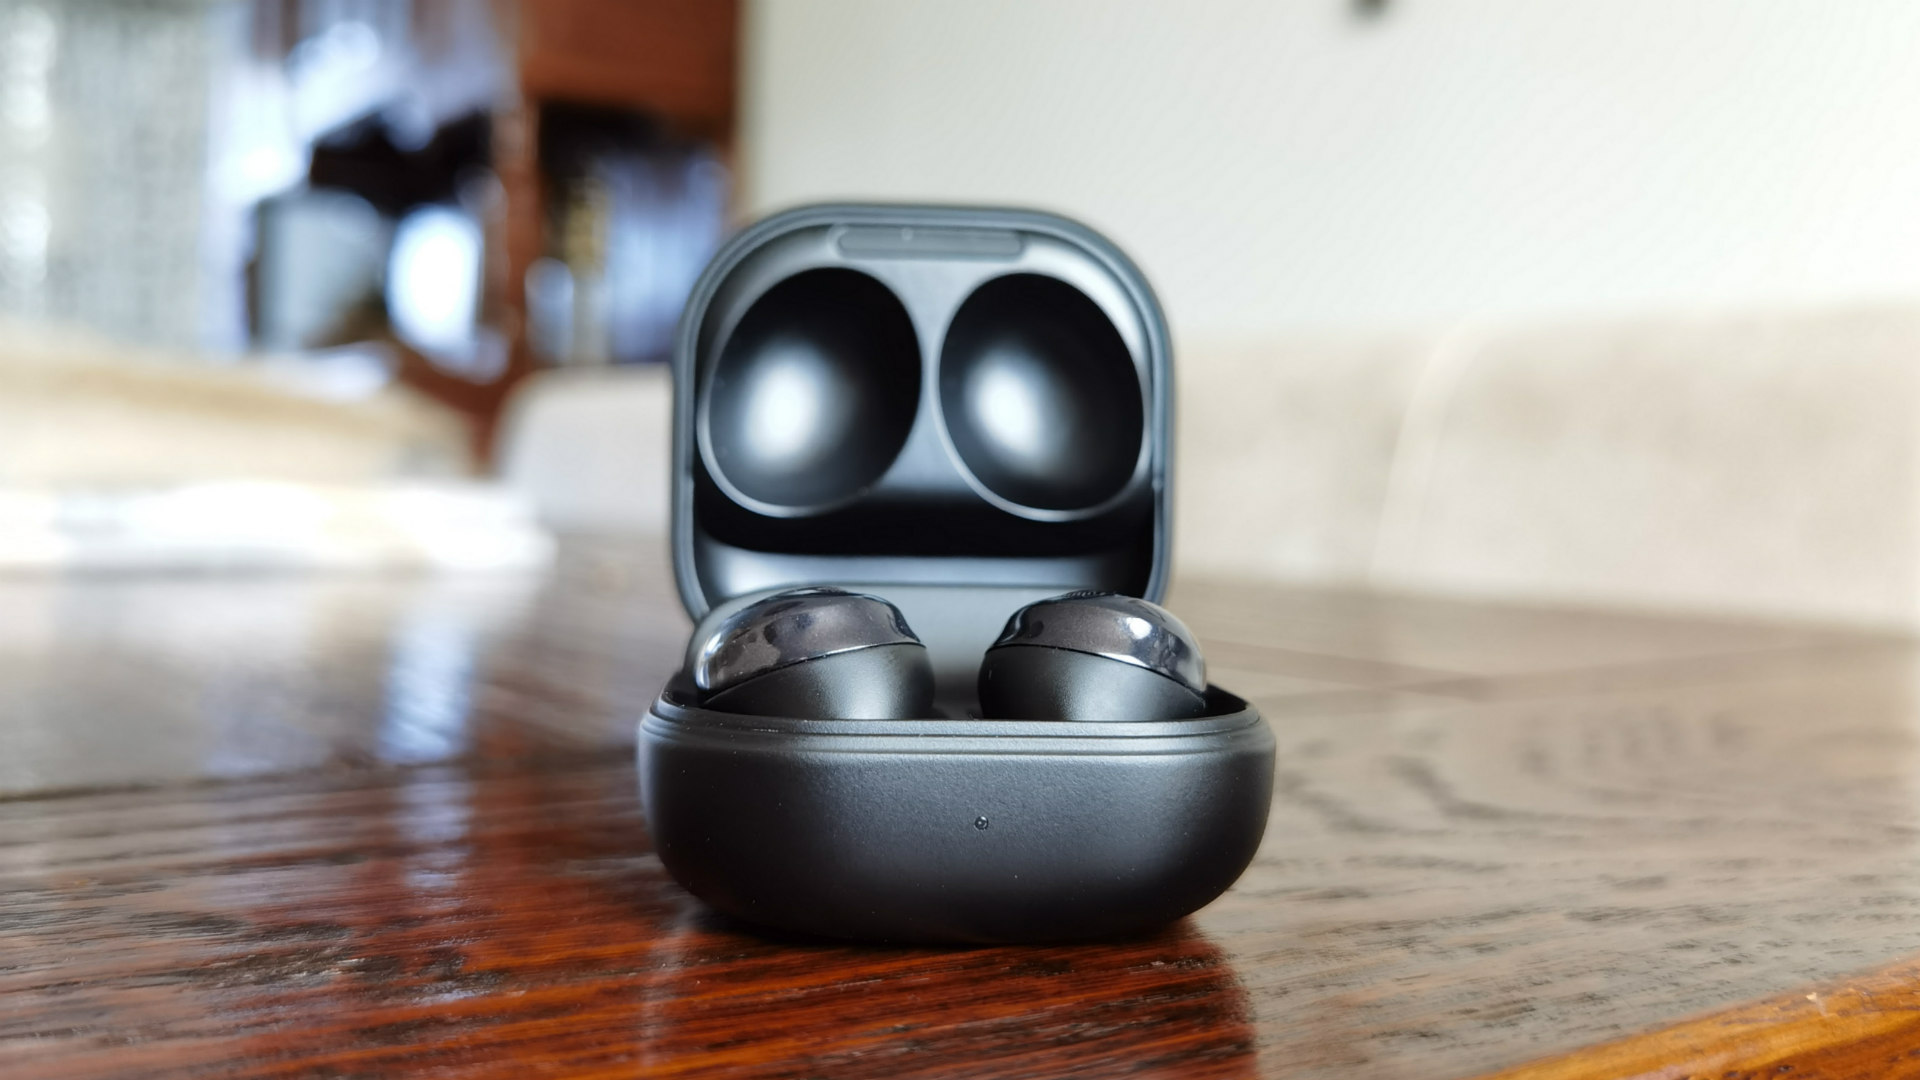 Samsung Galaxy Buds Pro in their charging case